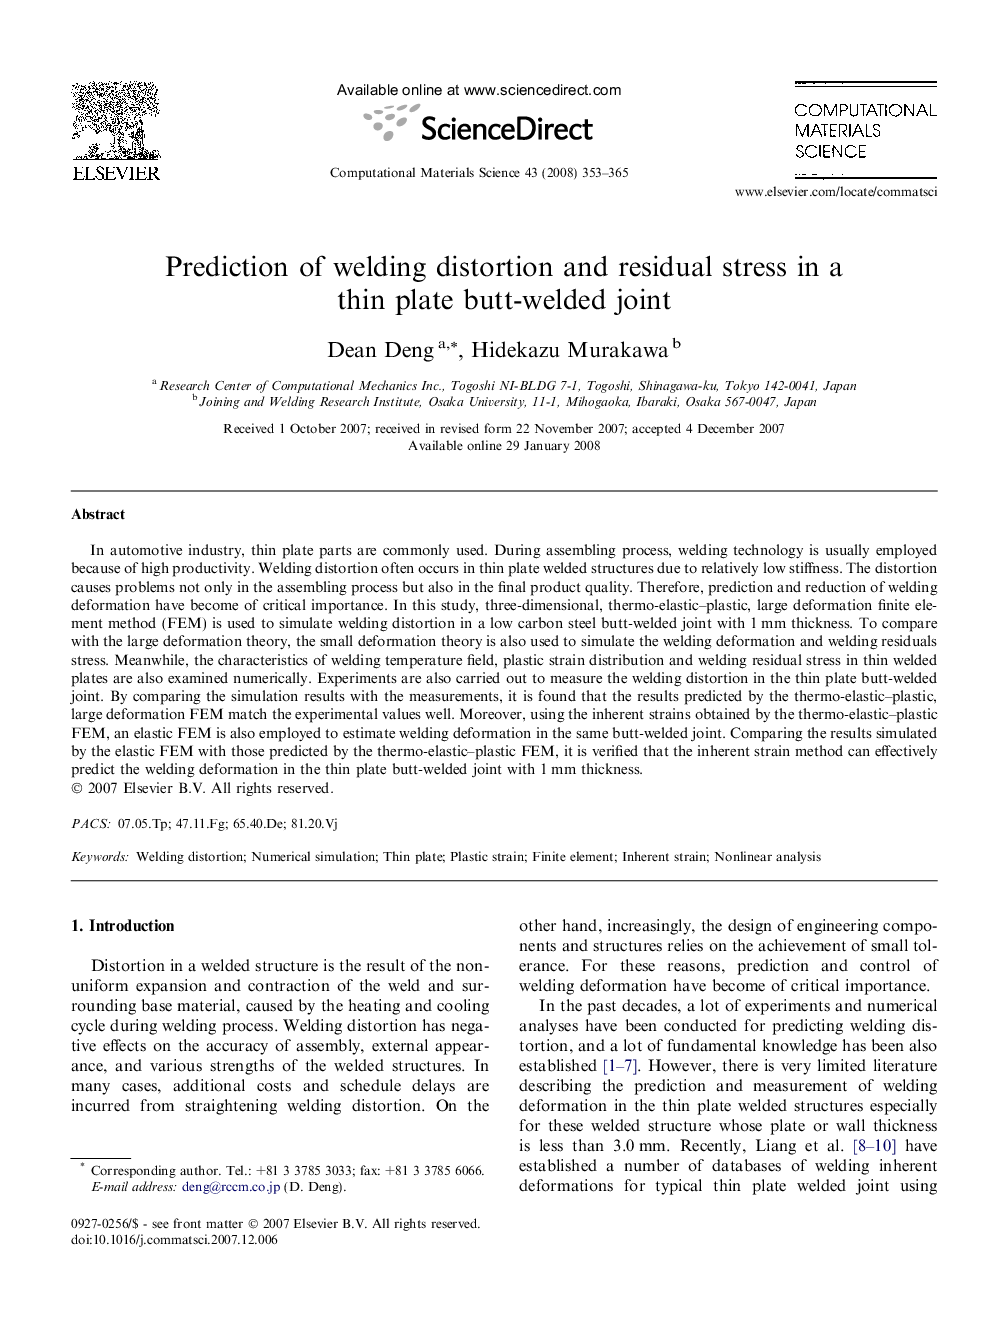 Prediction of welding distortion and residual stress in a thin plate butt-welded joint